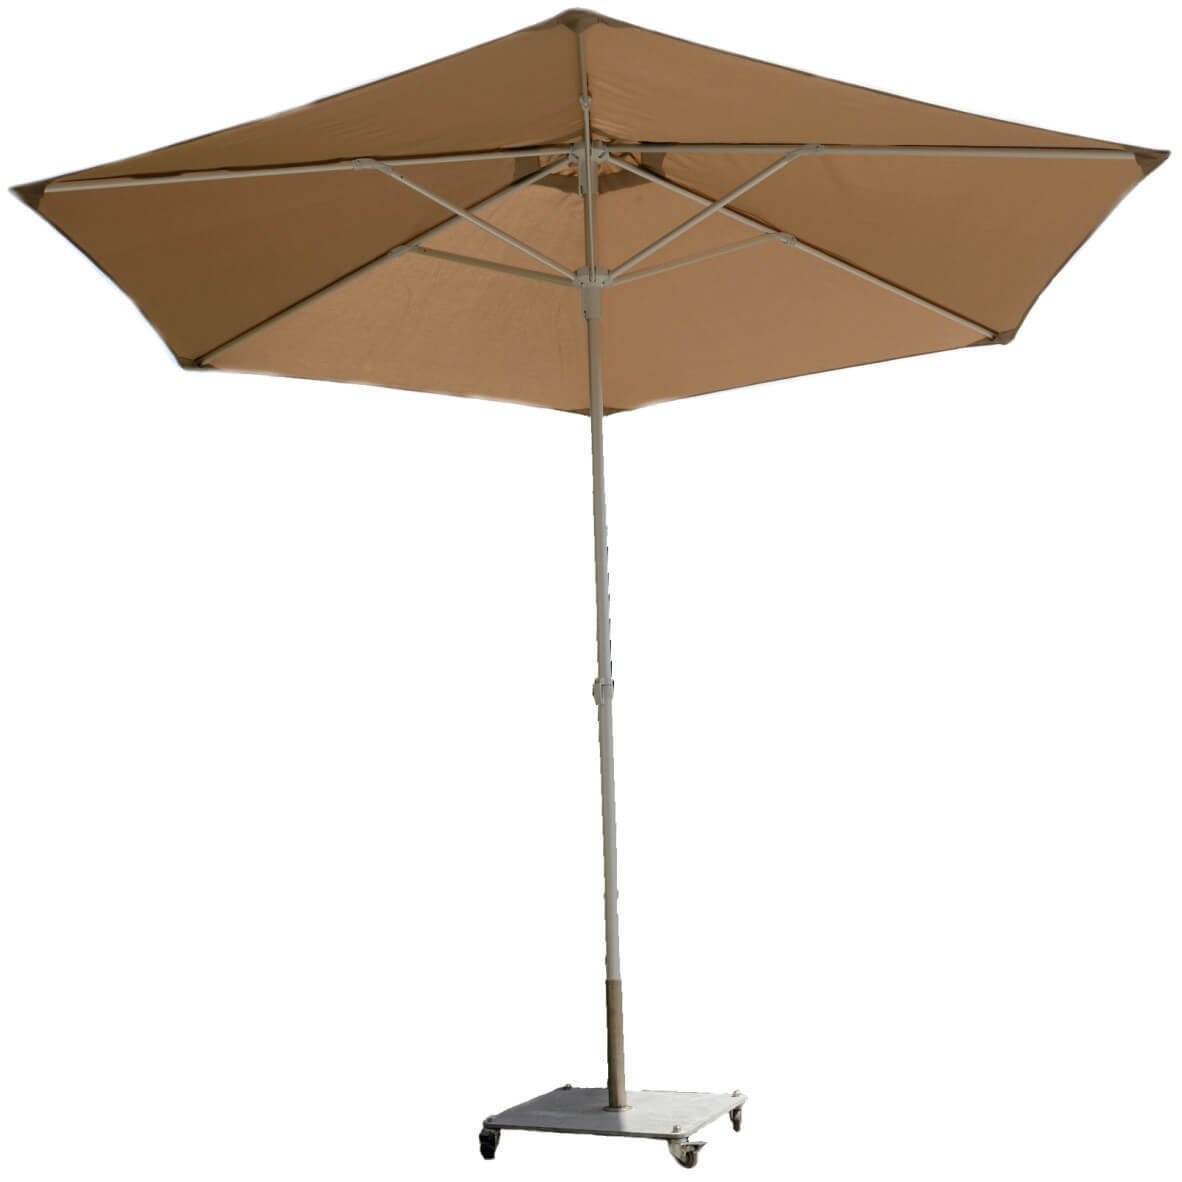 Sun umbrellas with a central stand